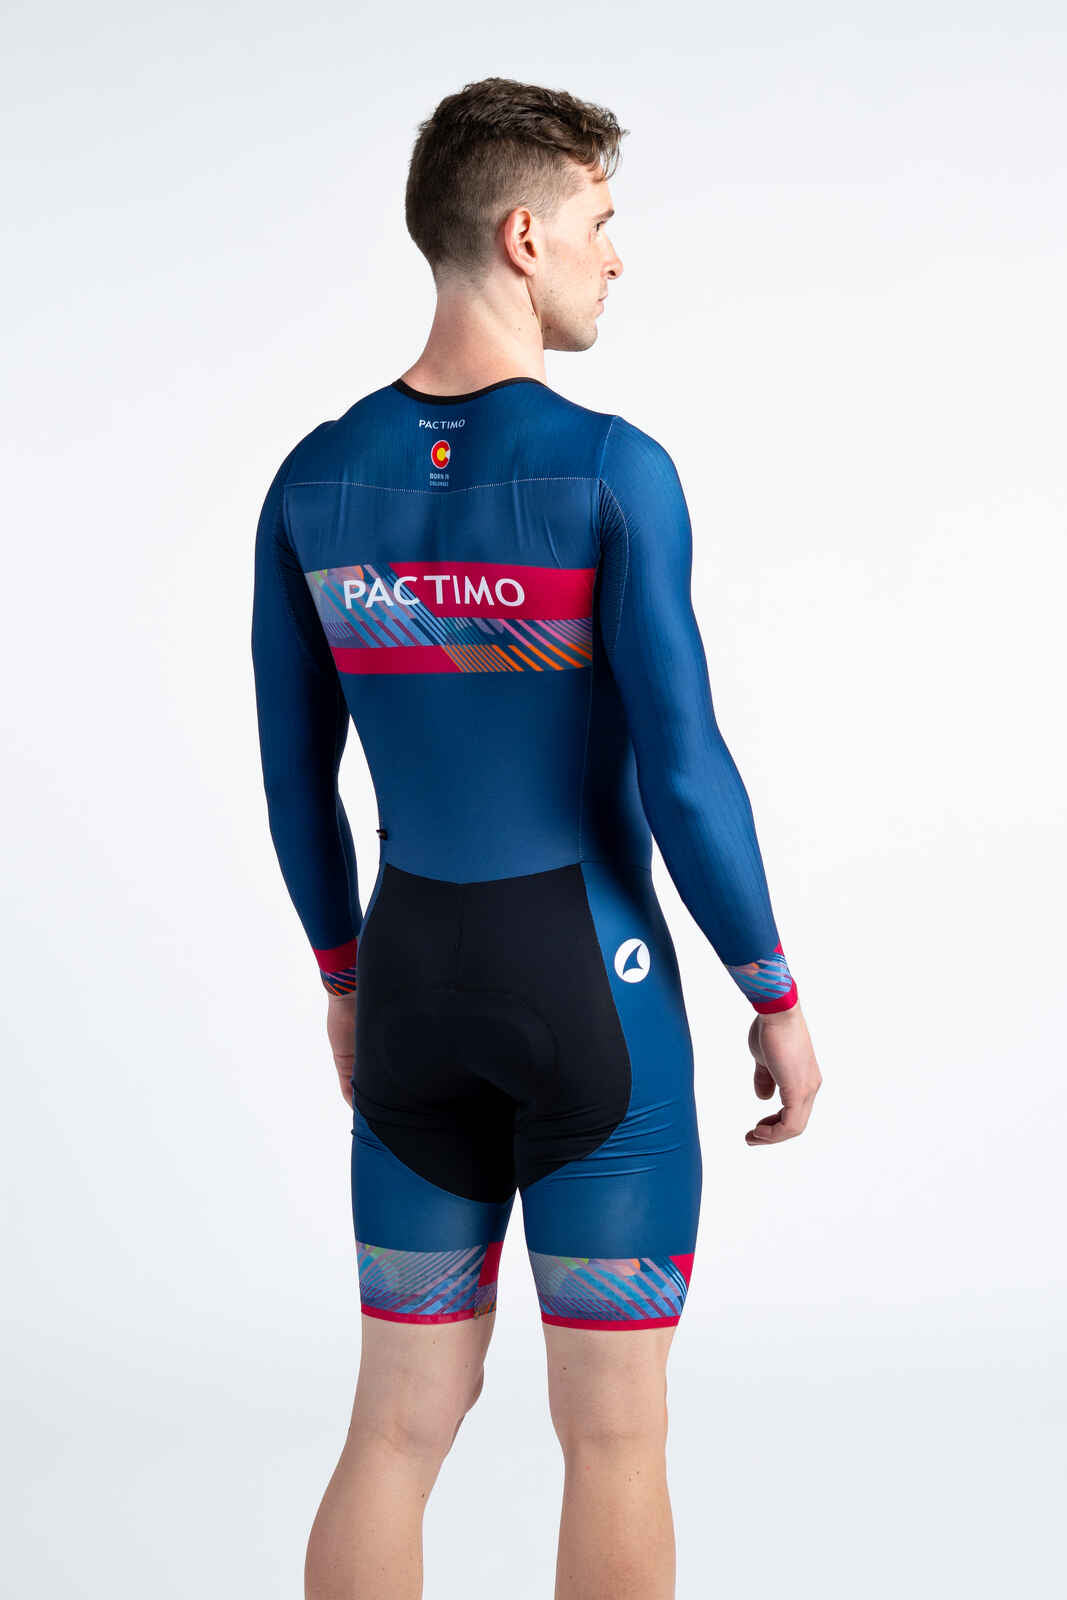 Men's Custom Cycling Skinsuit - Long Sleeve Back View #color-options_black-rise